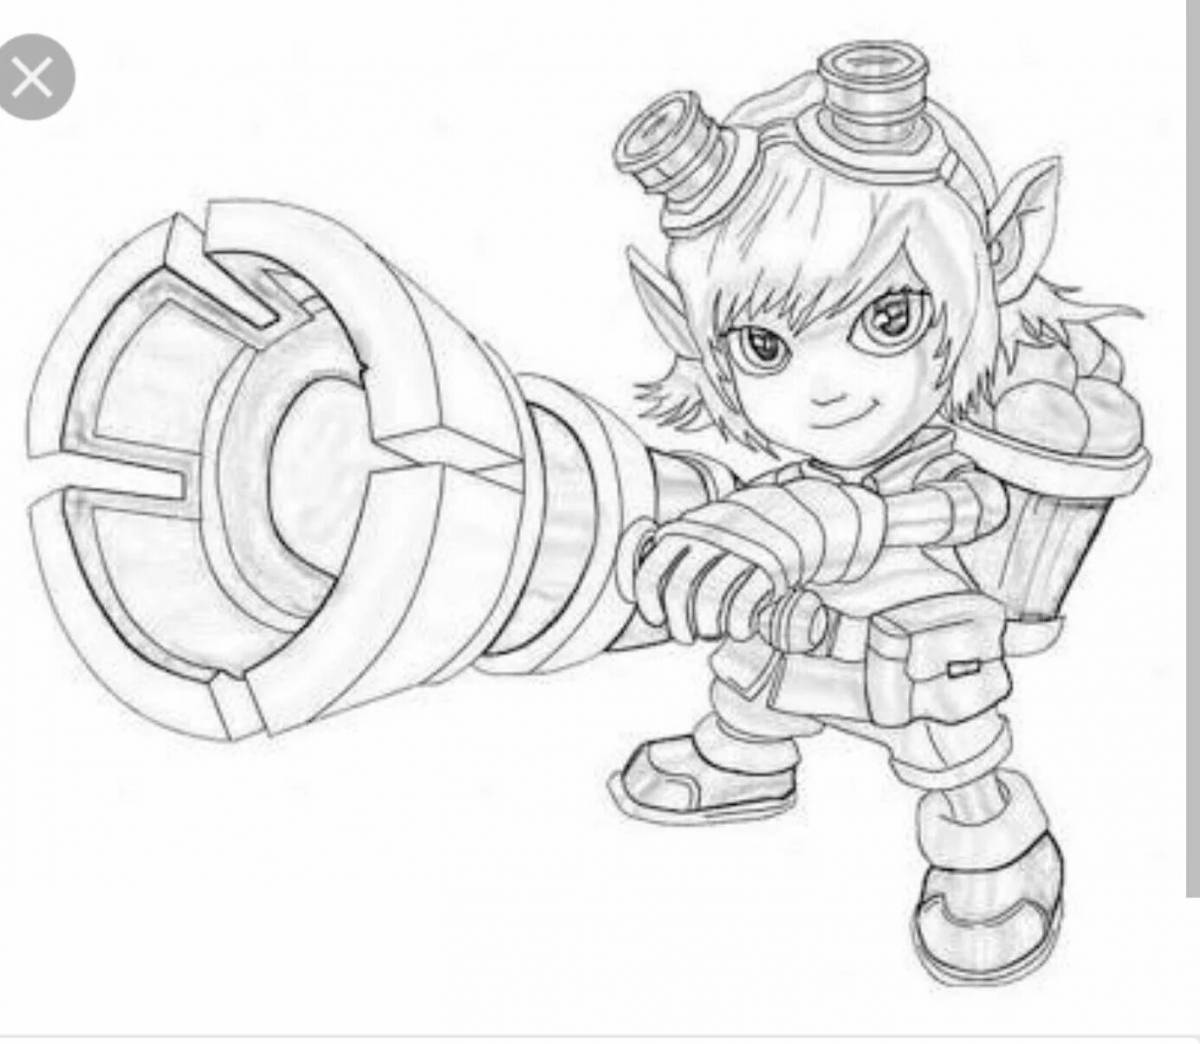 Intriguing mobile legends coloring book